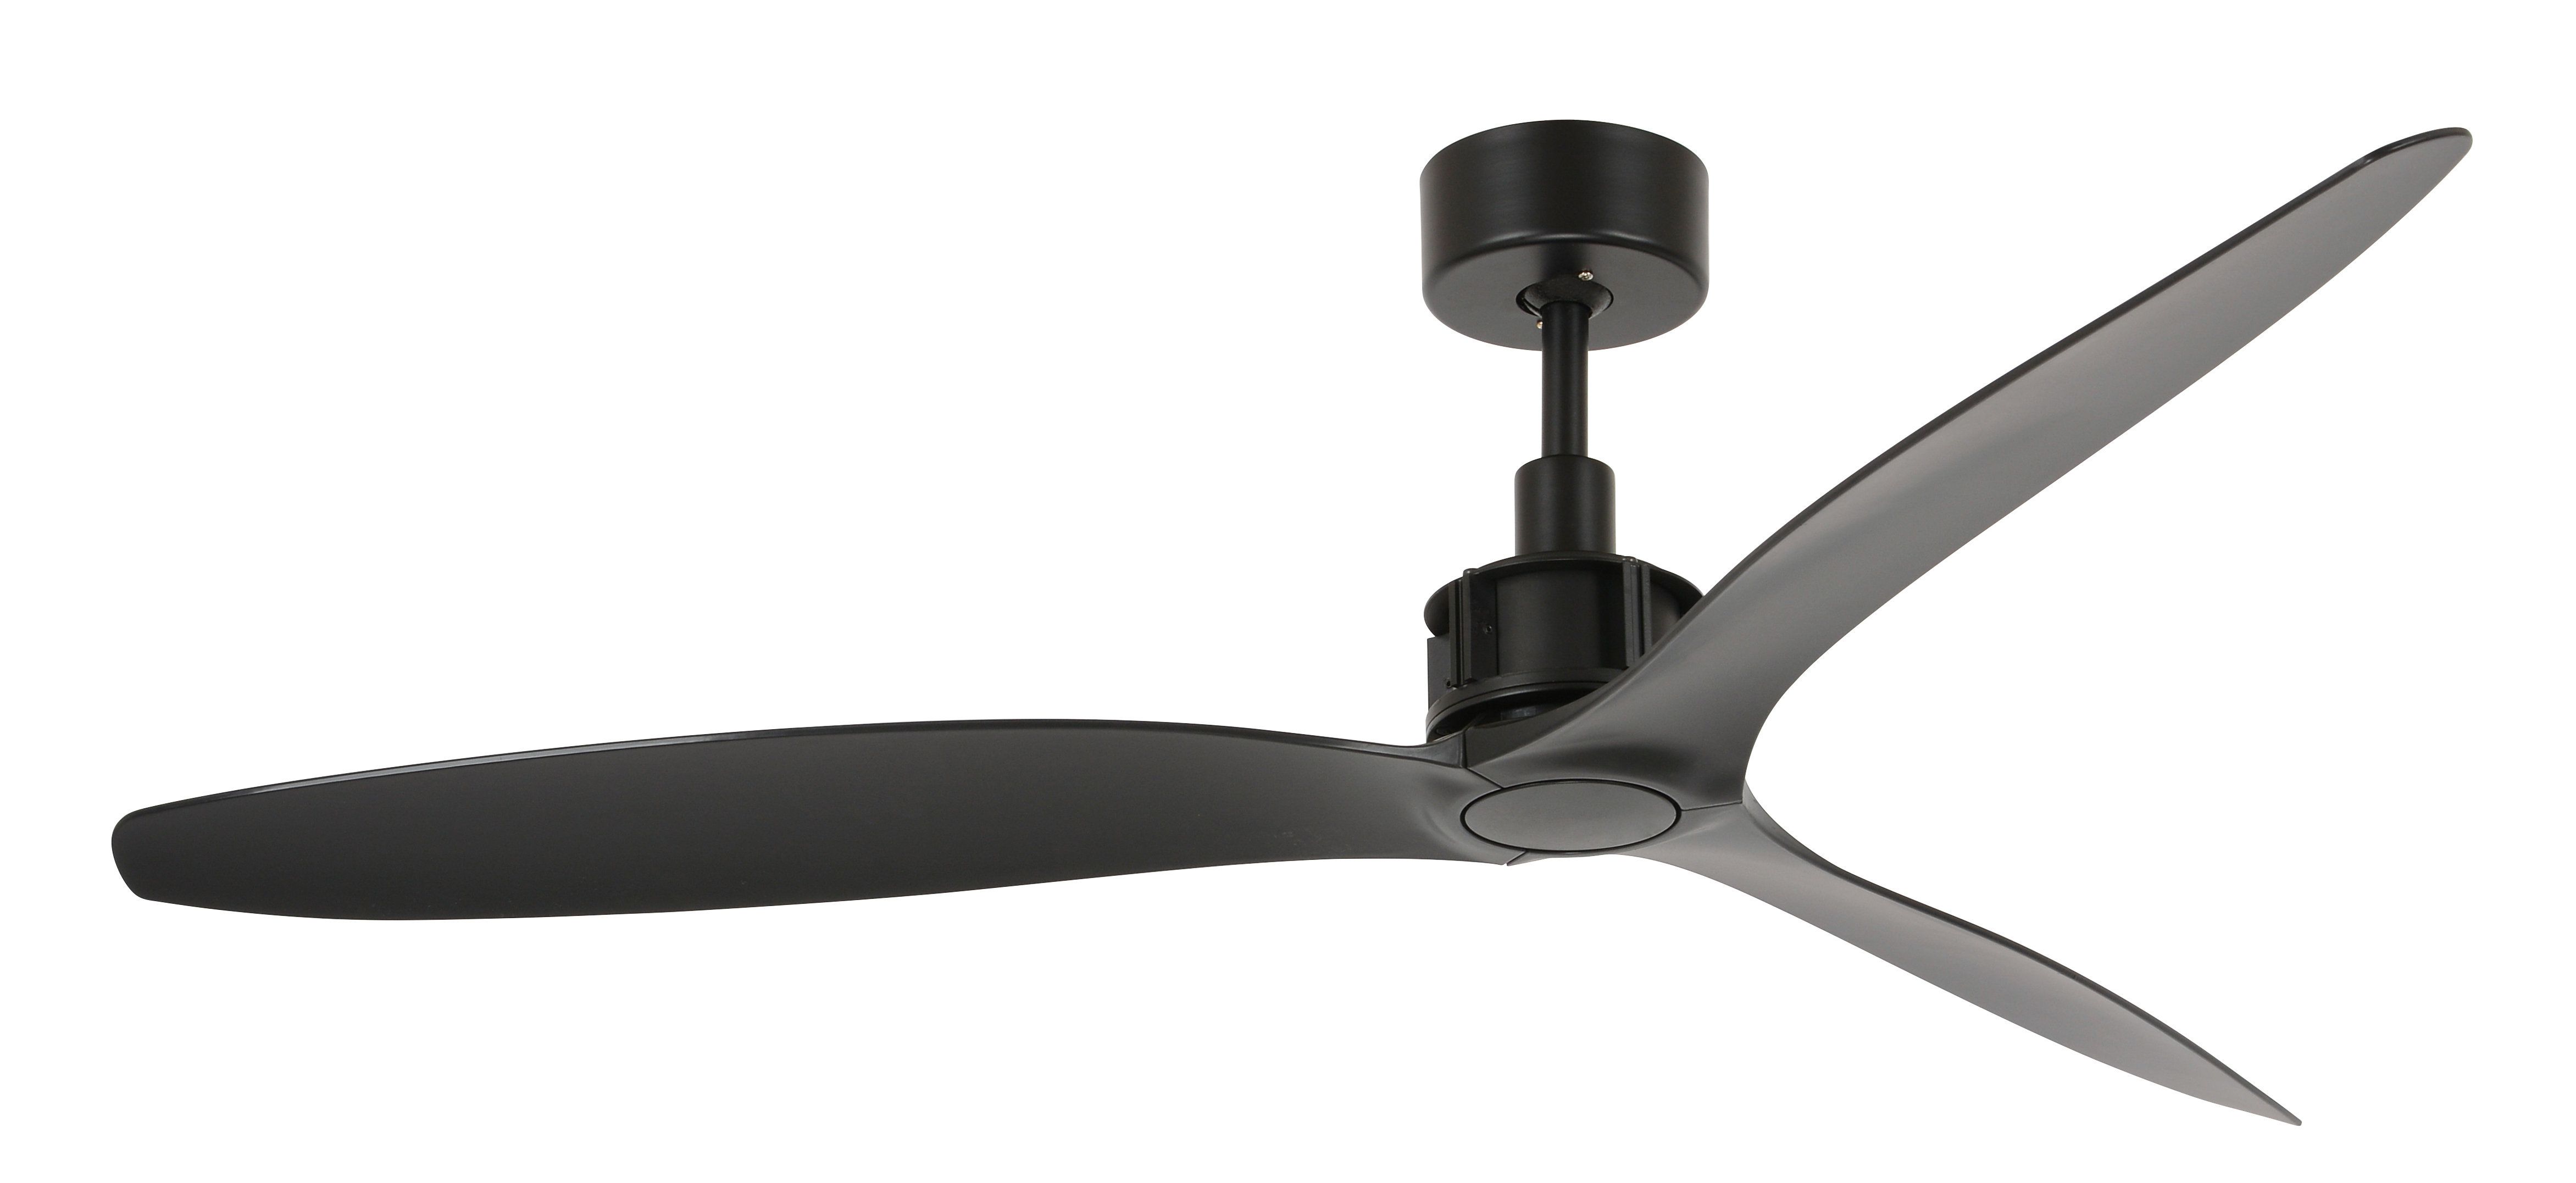 Theron 52" Catoe 3 Blade Ceiling Fan With Remote In 2020 Roto 3 Blade Ceiling Fans (View 10 of 20)